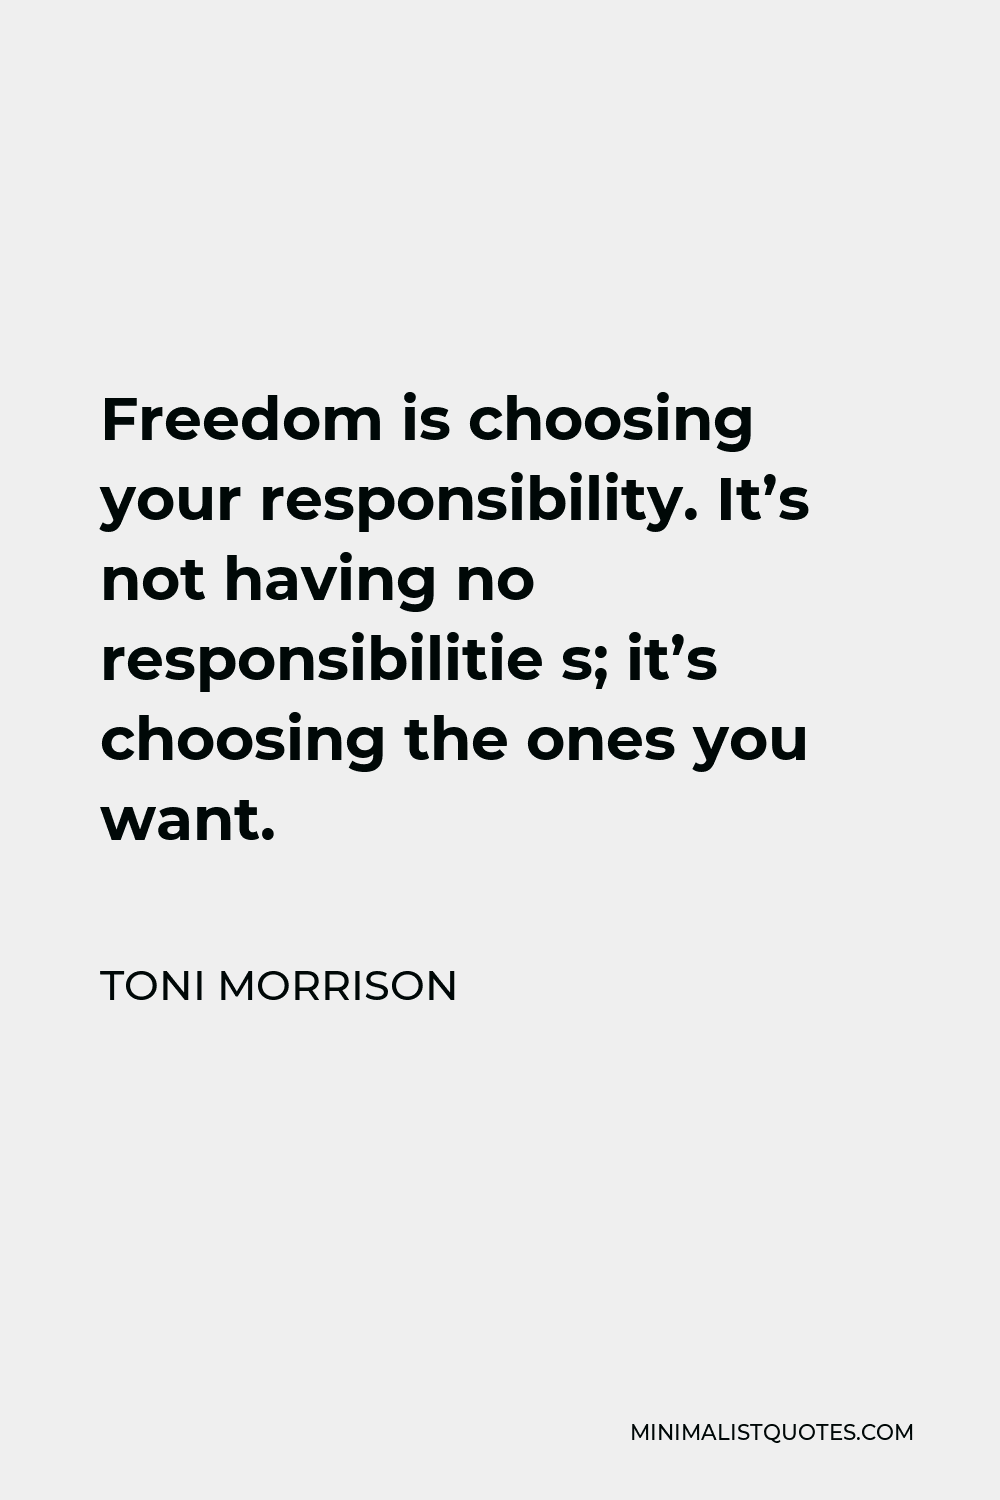 Toni Morrison Quote - Freedom is choosing your responsibility. It’s not having no responsibilitie s; it’s choosing the ones you want.